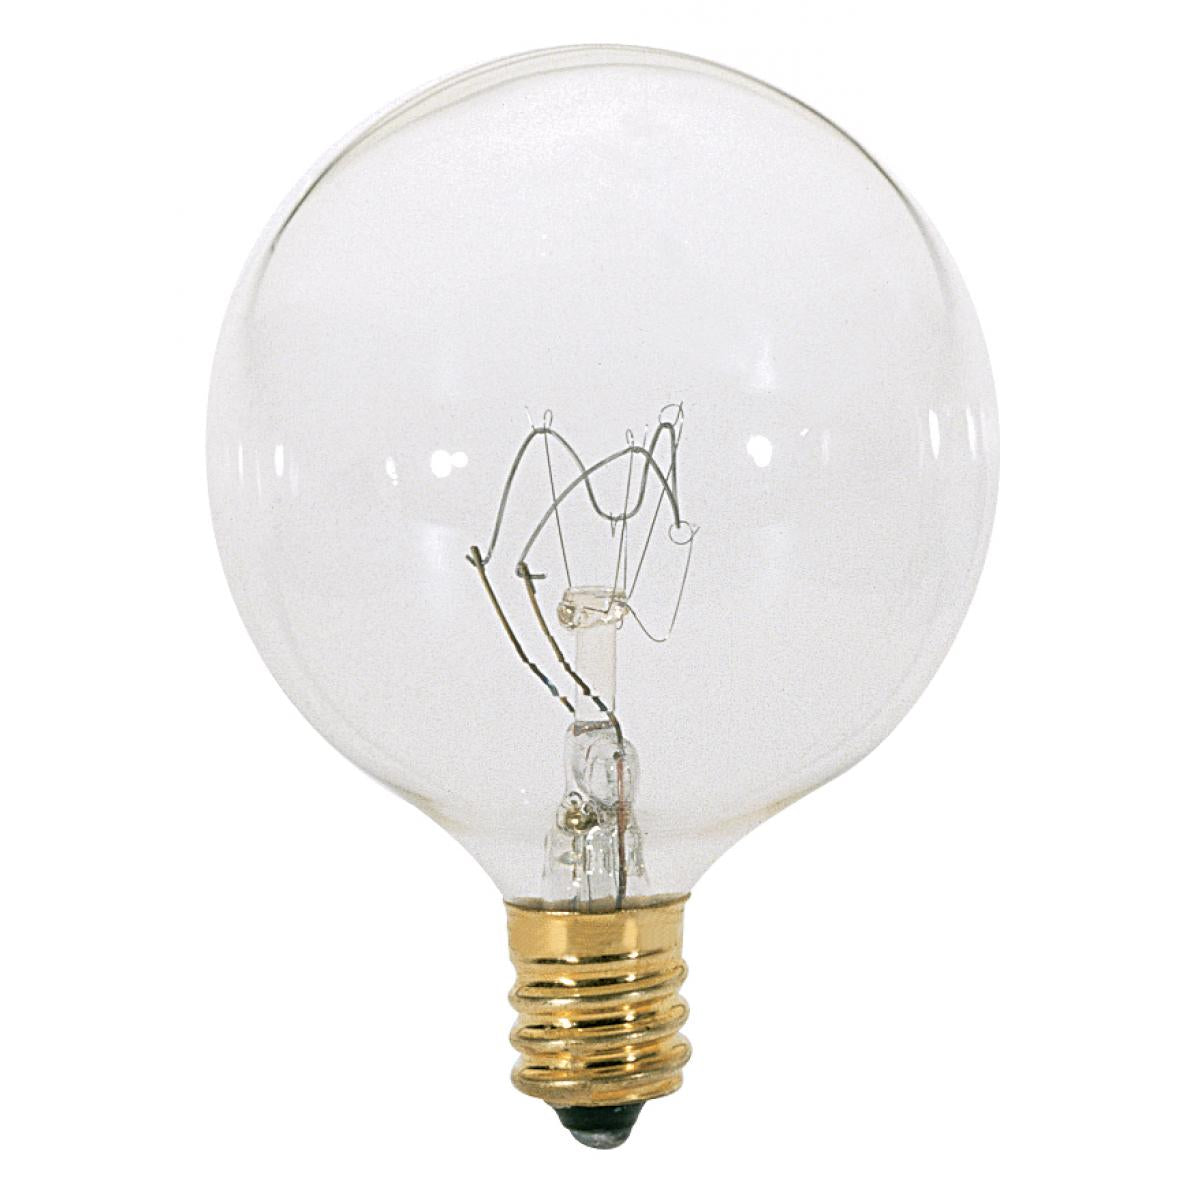 Satco S3727 25 Watt G16 1/2 Incandescent Clear 1500 Average rated hours 232 Lumens Candelabra base 120 Volt 2-Card